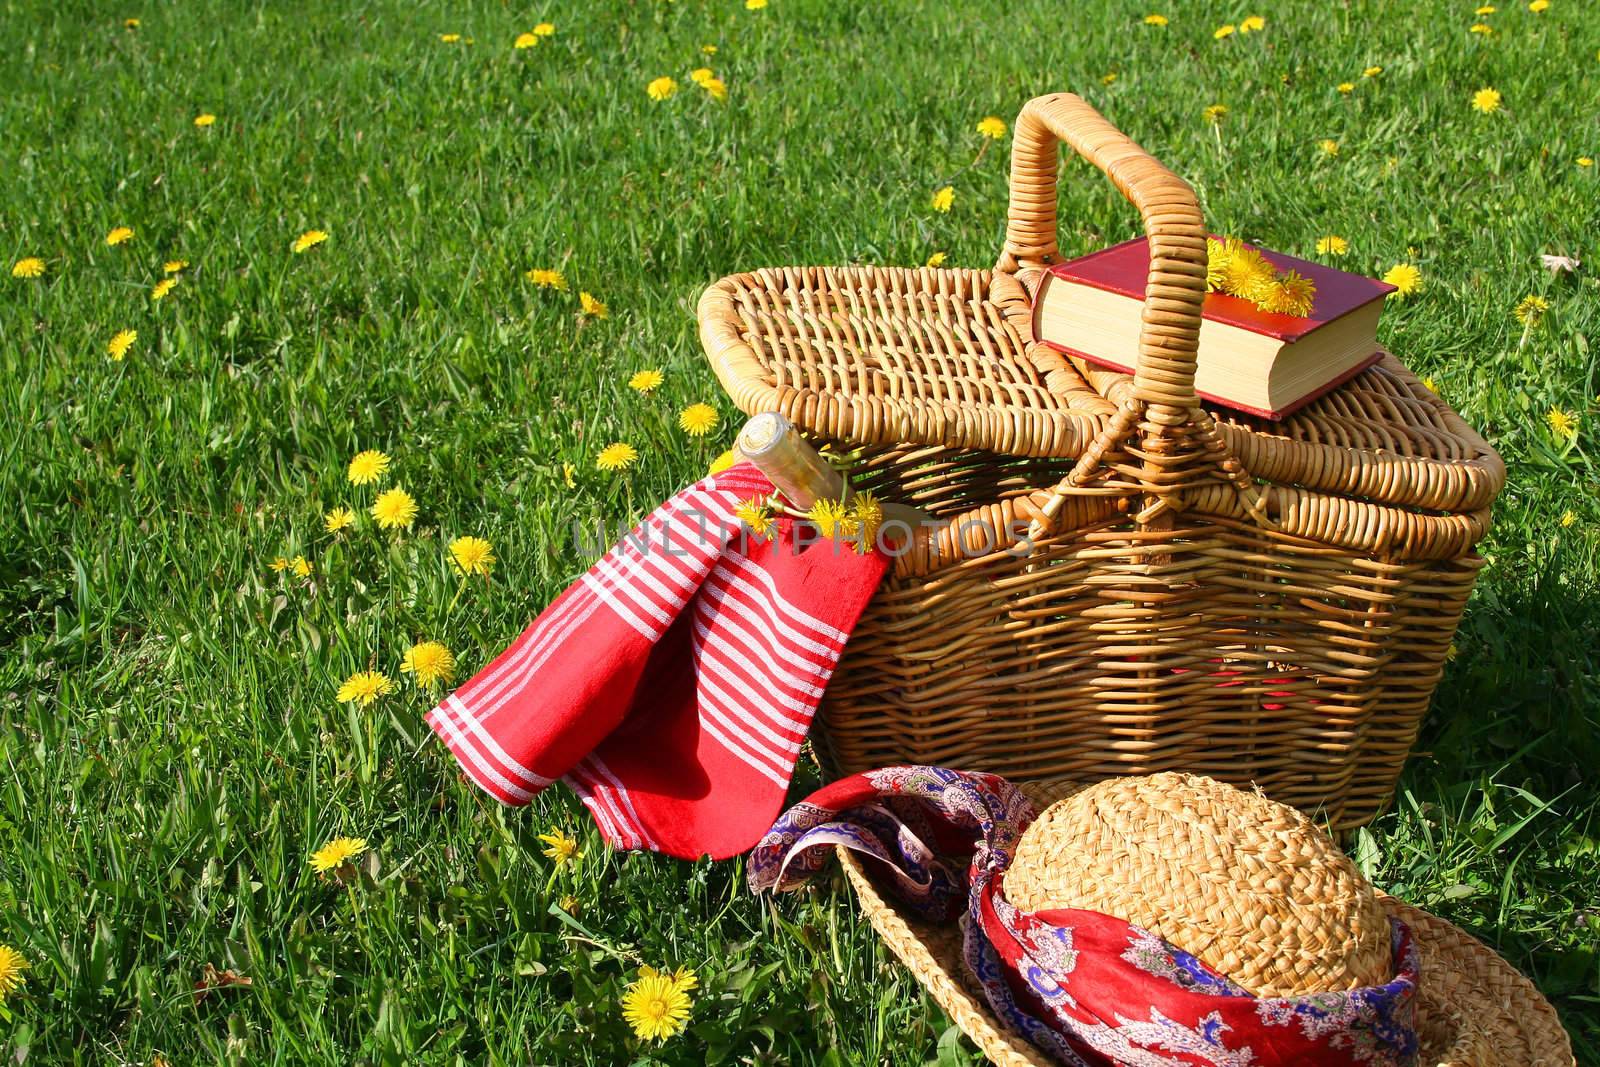 
Picnic basket and straw hat laying on the grass